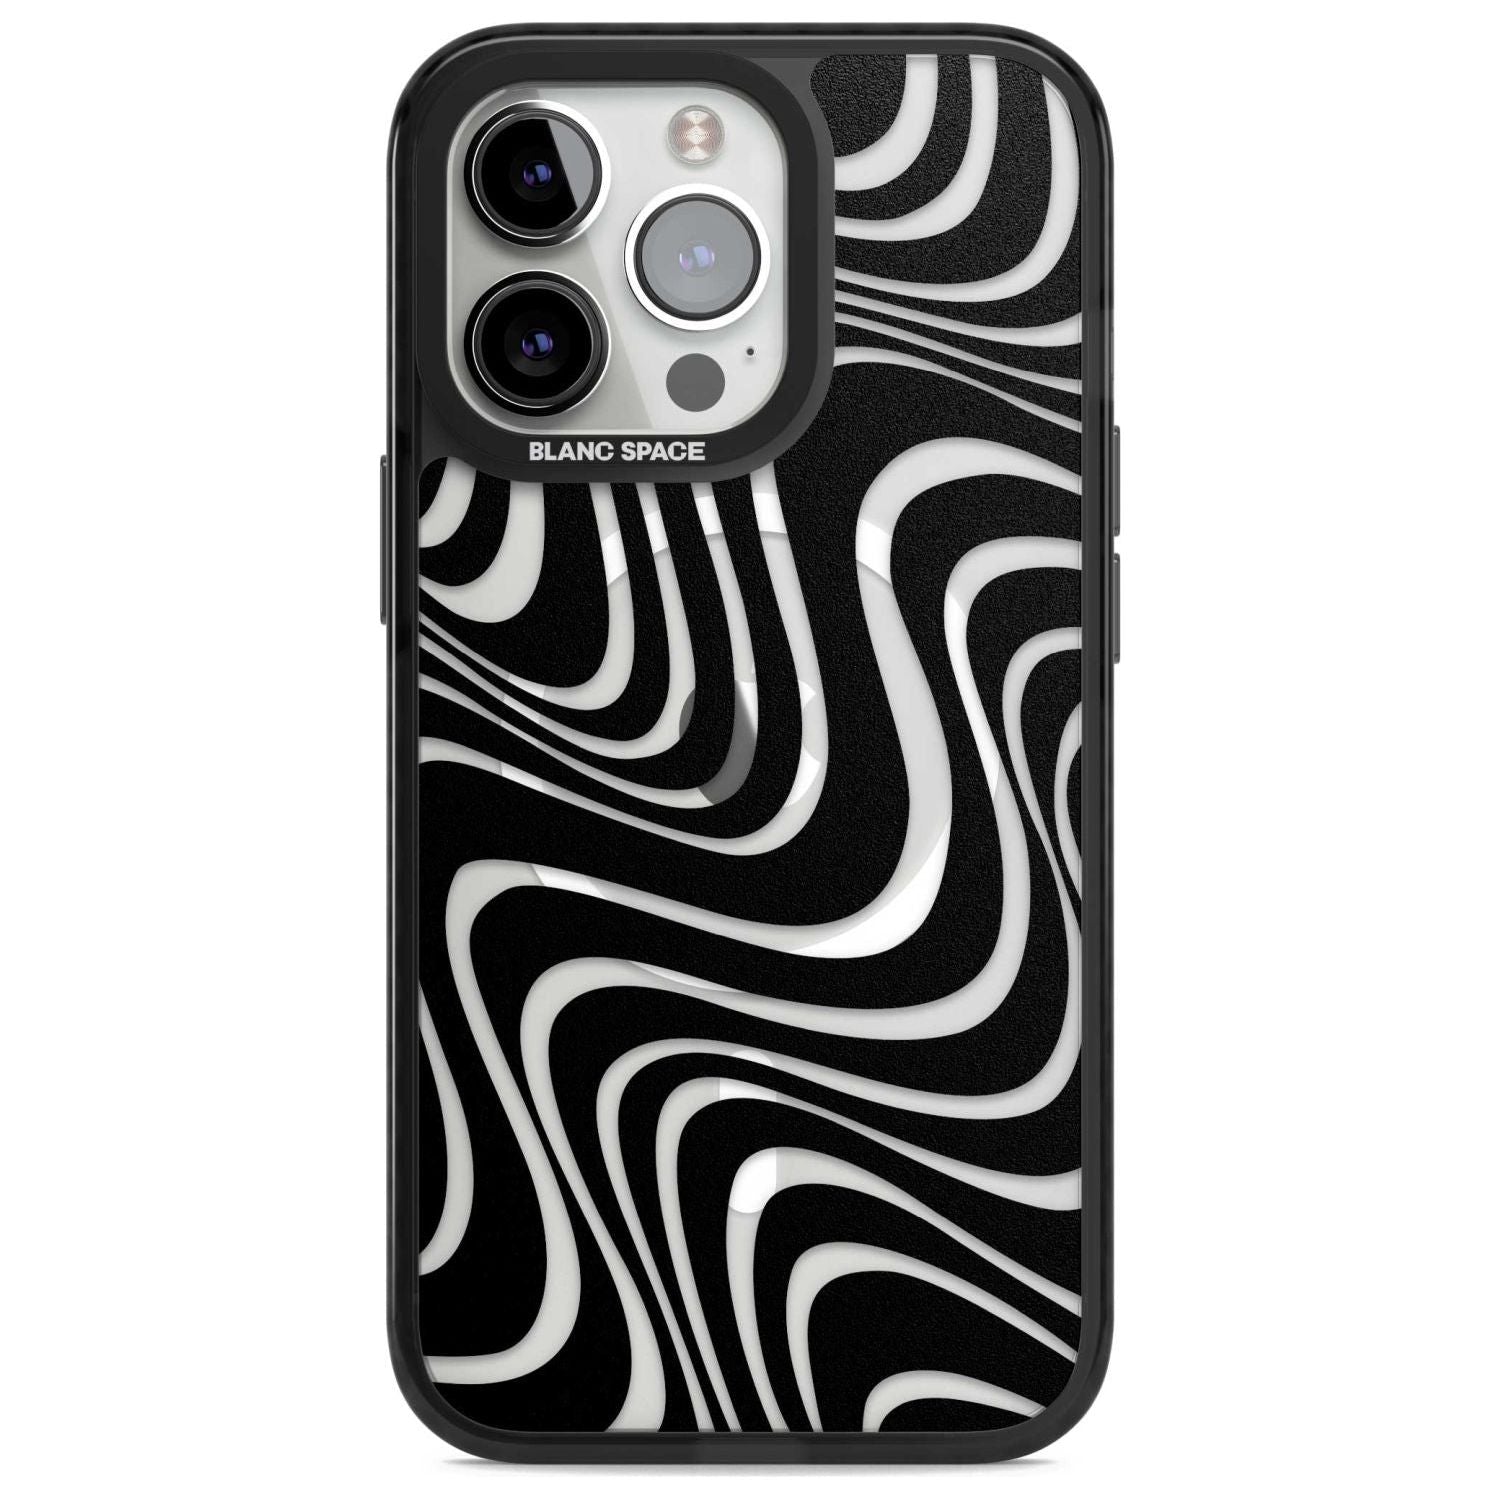 Abstract Waves Phone Case iPhone 15 Pro Max / Magsafe Black Impact Case,iPhone 15 Pro / Magsafe Black Impact Case,iPhone 14 Pro Max / Magsafe Black Impact Case,iPhone 14 Pro / Magsafe Black Impact Case,iPhone 13 Pro / Magsafe Black Impact Case Blanc Space